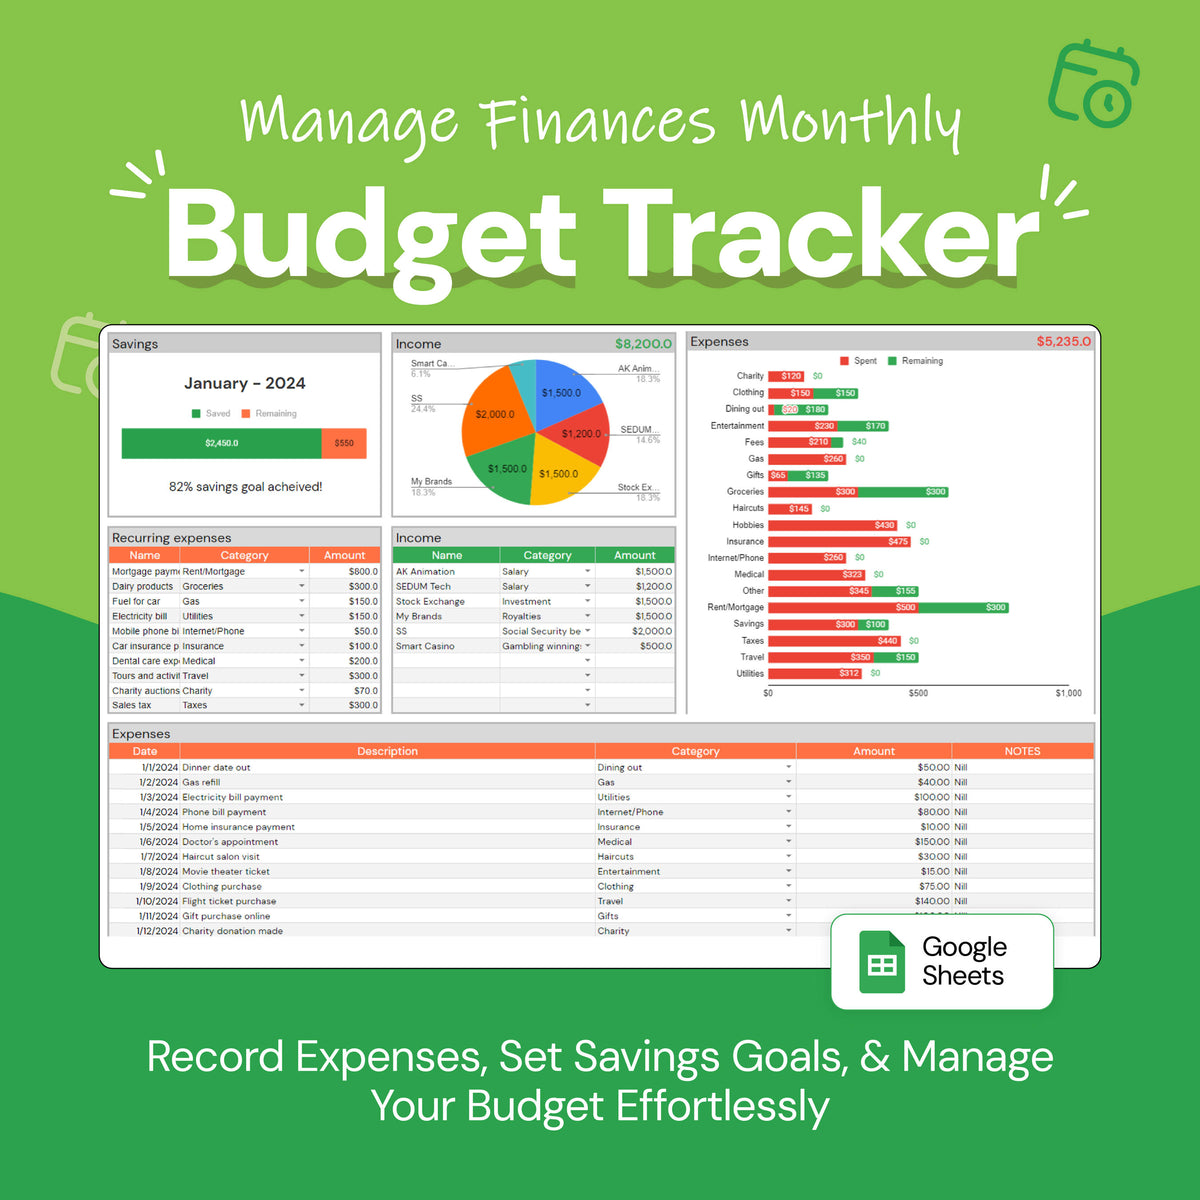 Monthly Budget Tracker